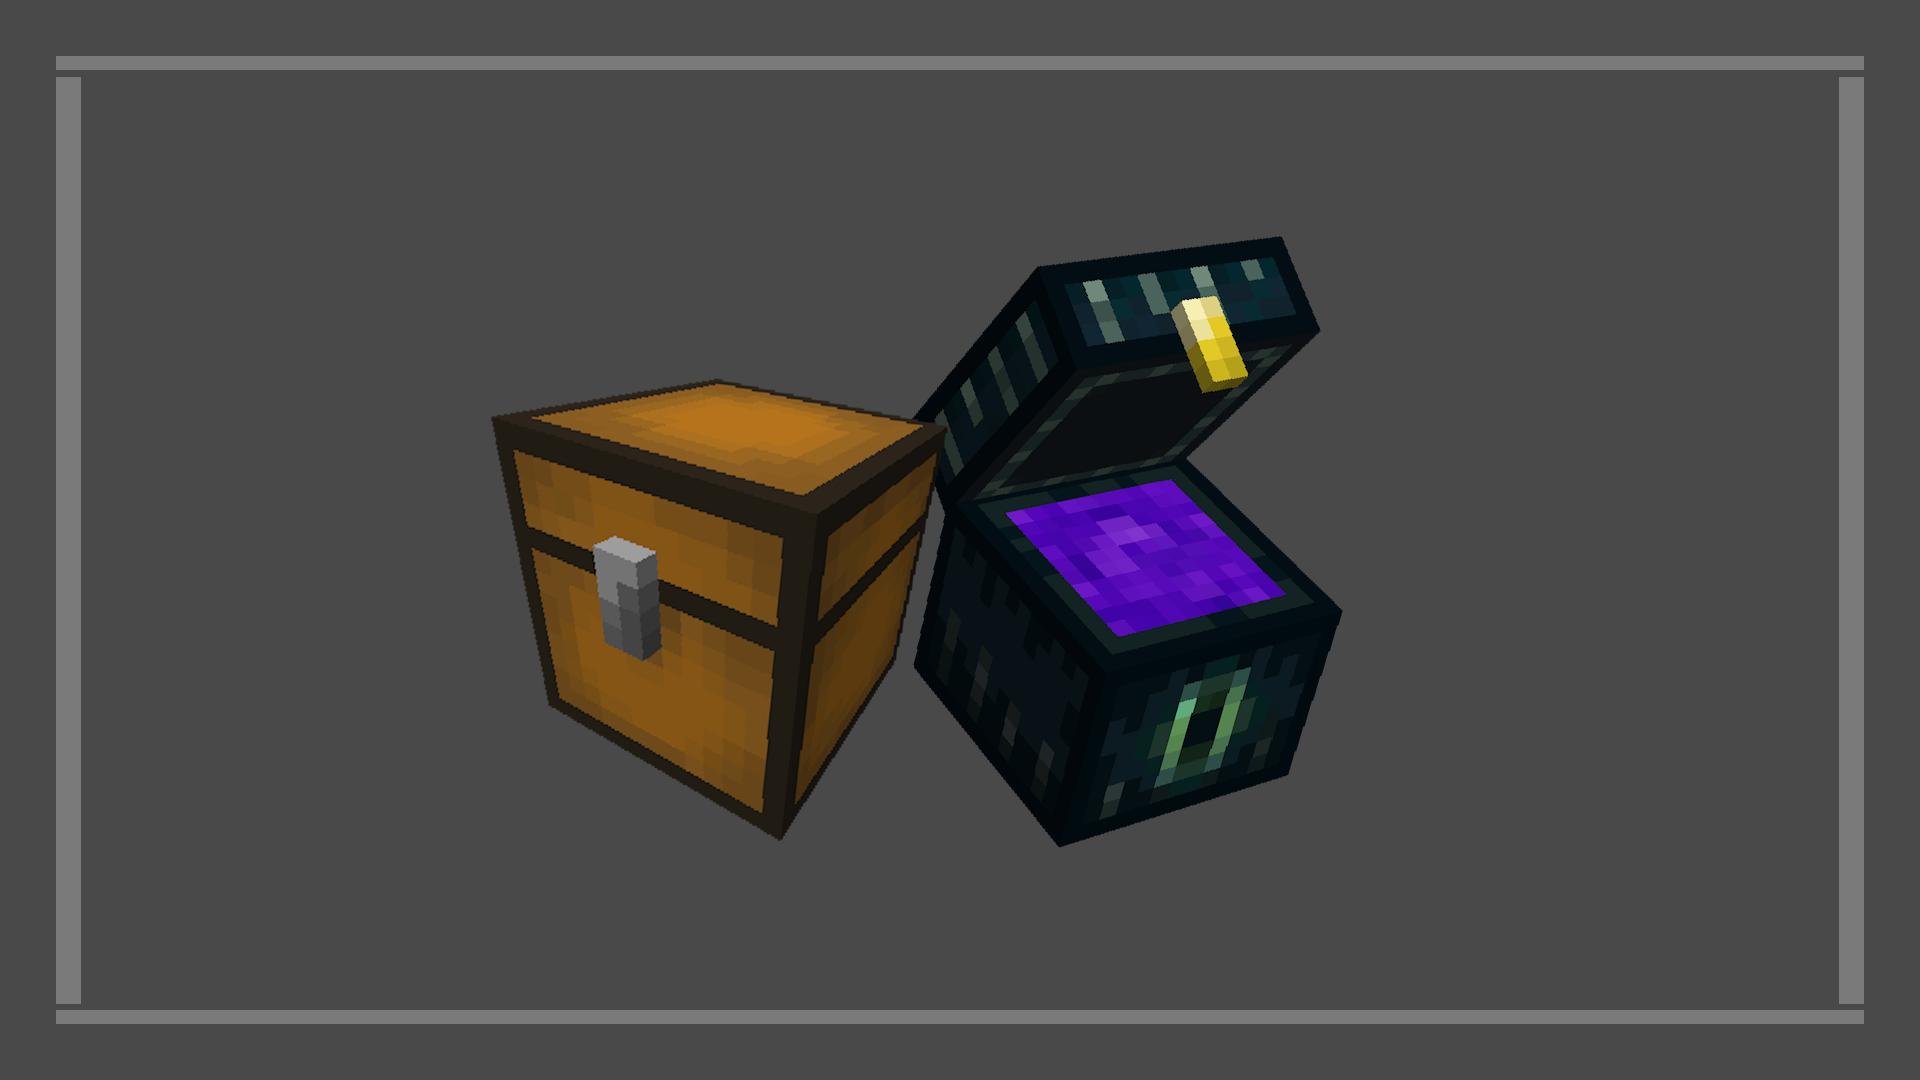 Rethought Chests